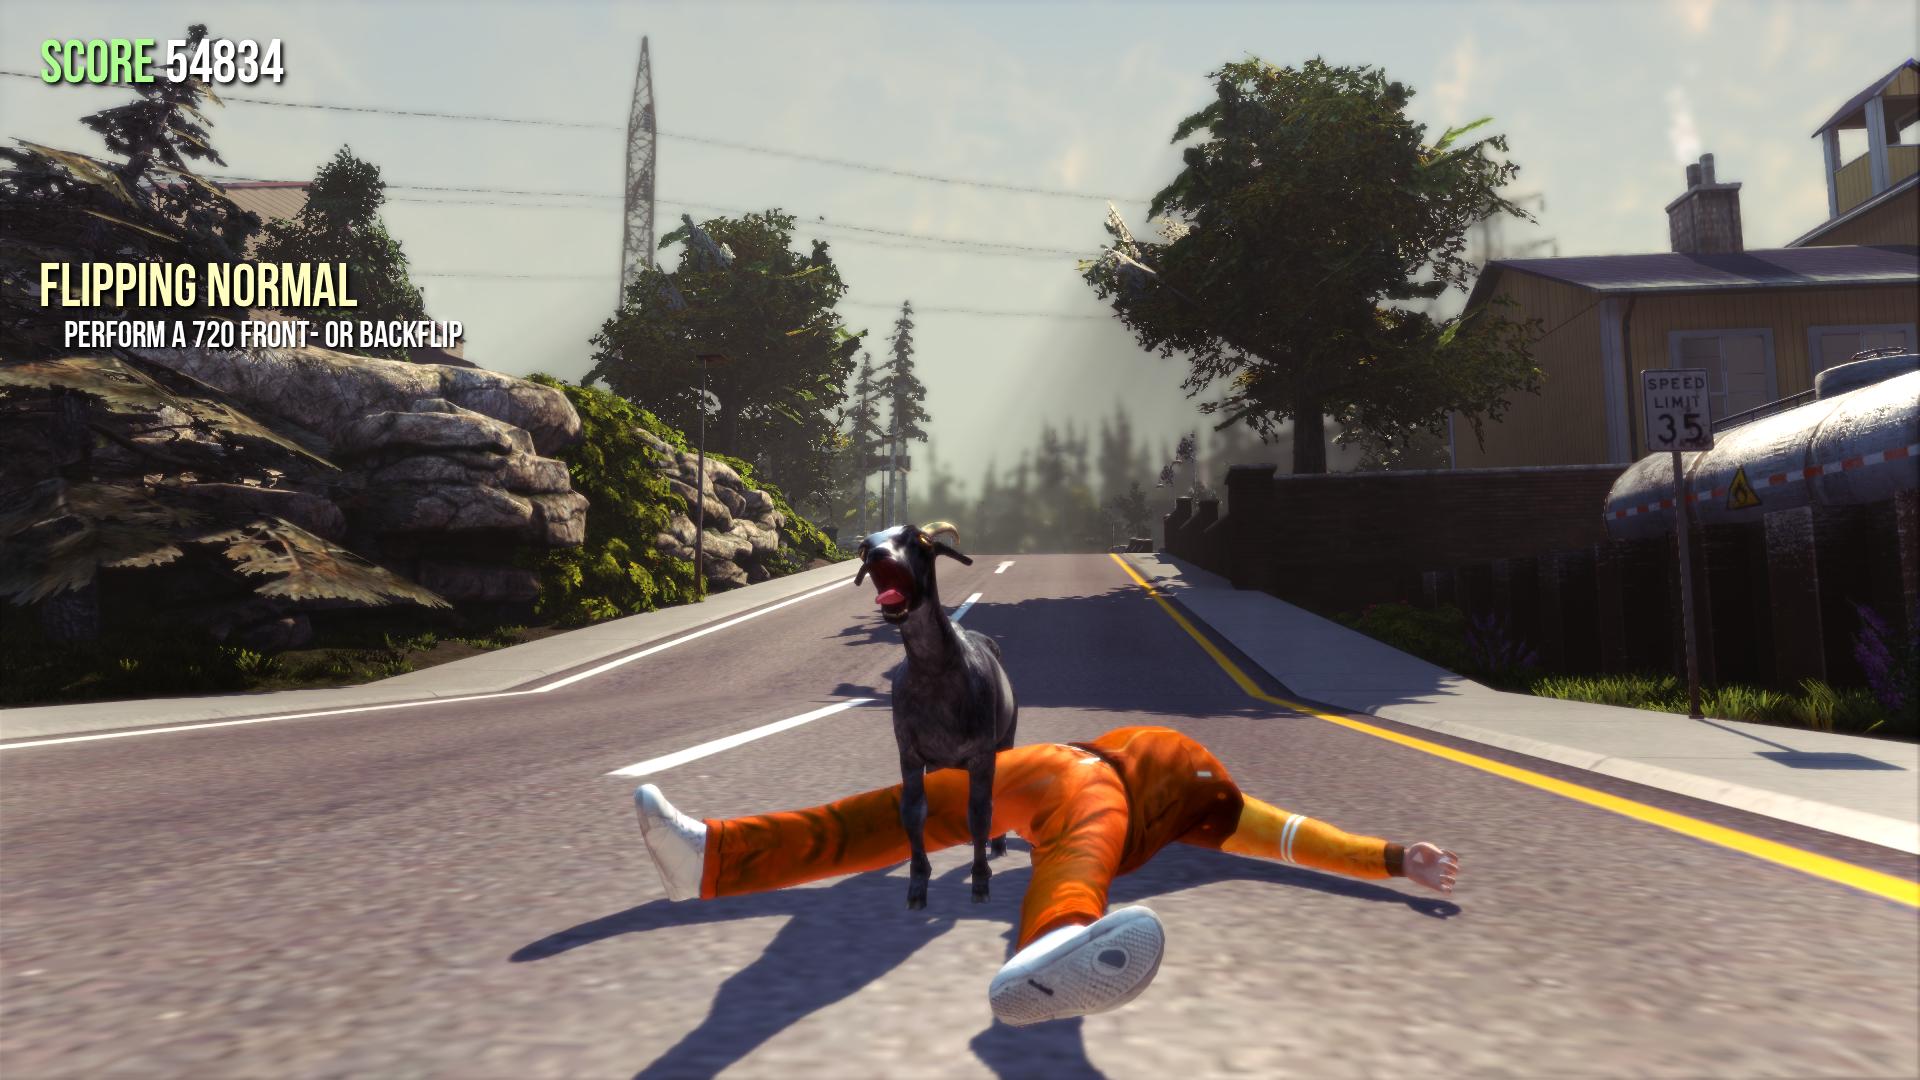 how to get goat simulator for free on pc 2016